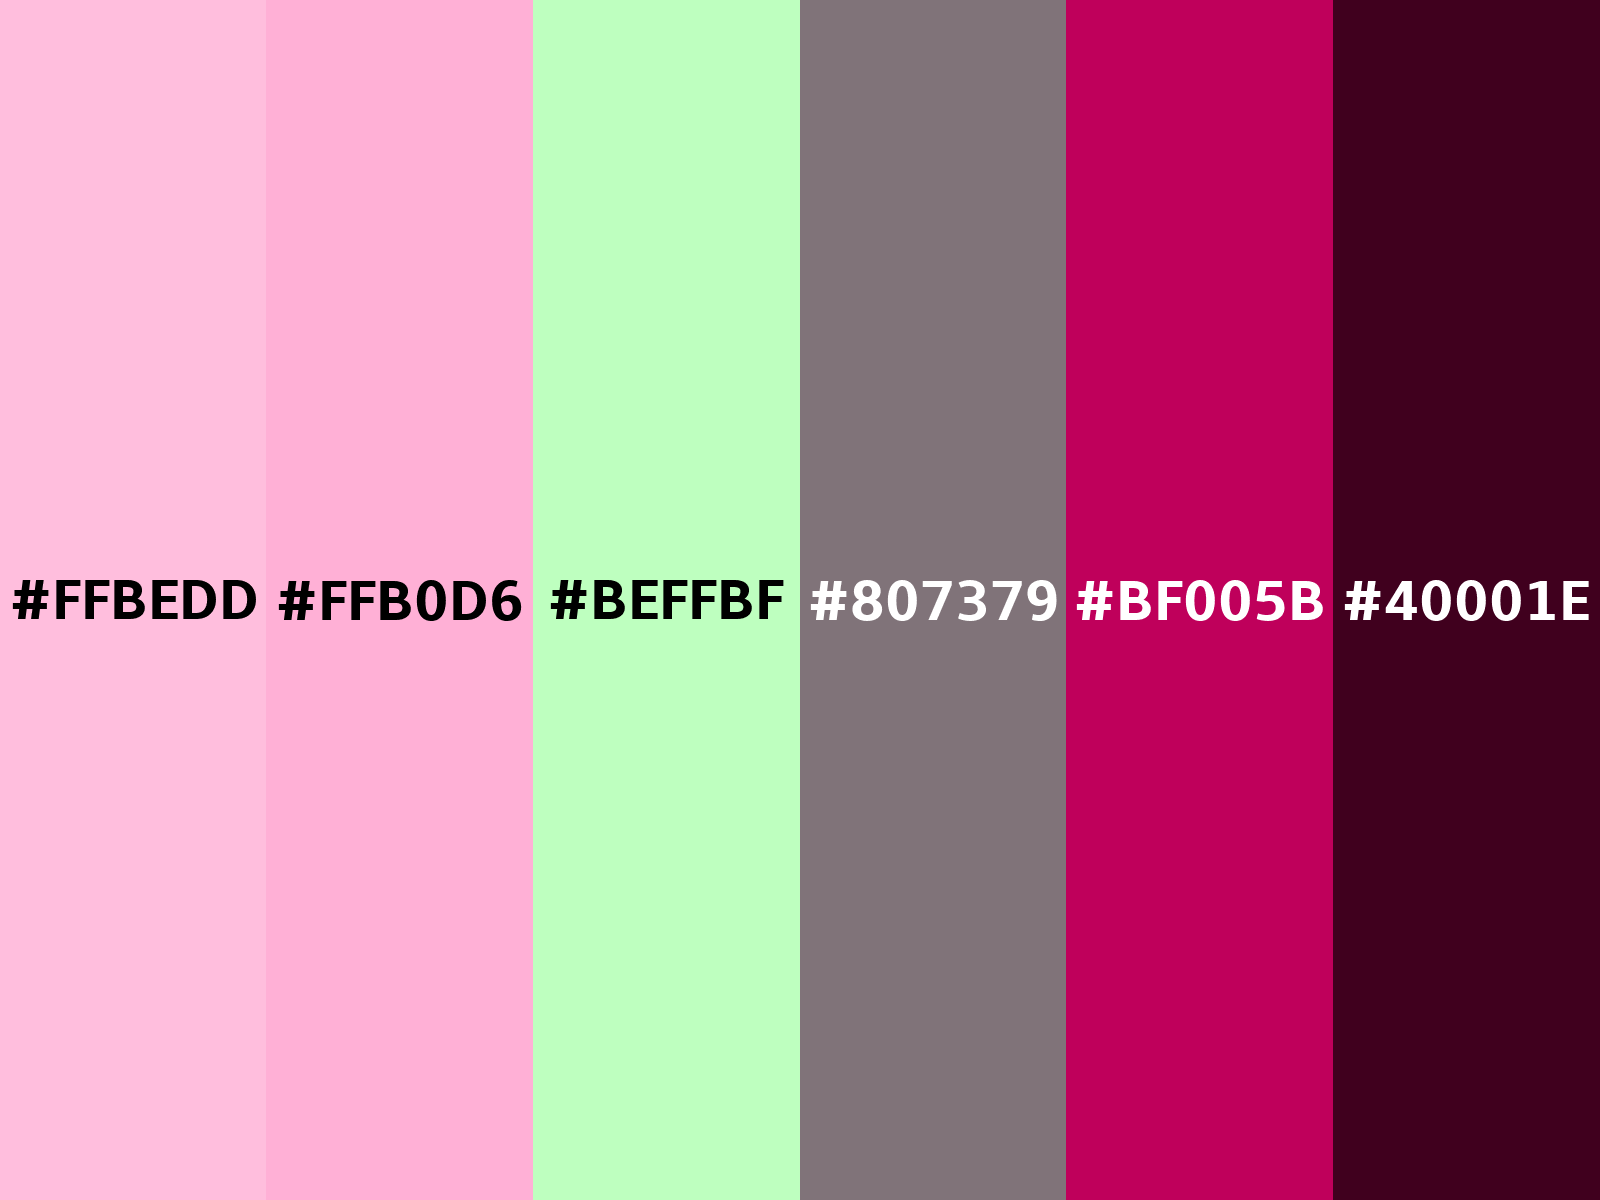 1FBED6 Hex Color, RGB: 31, 190, 214